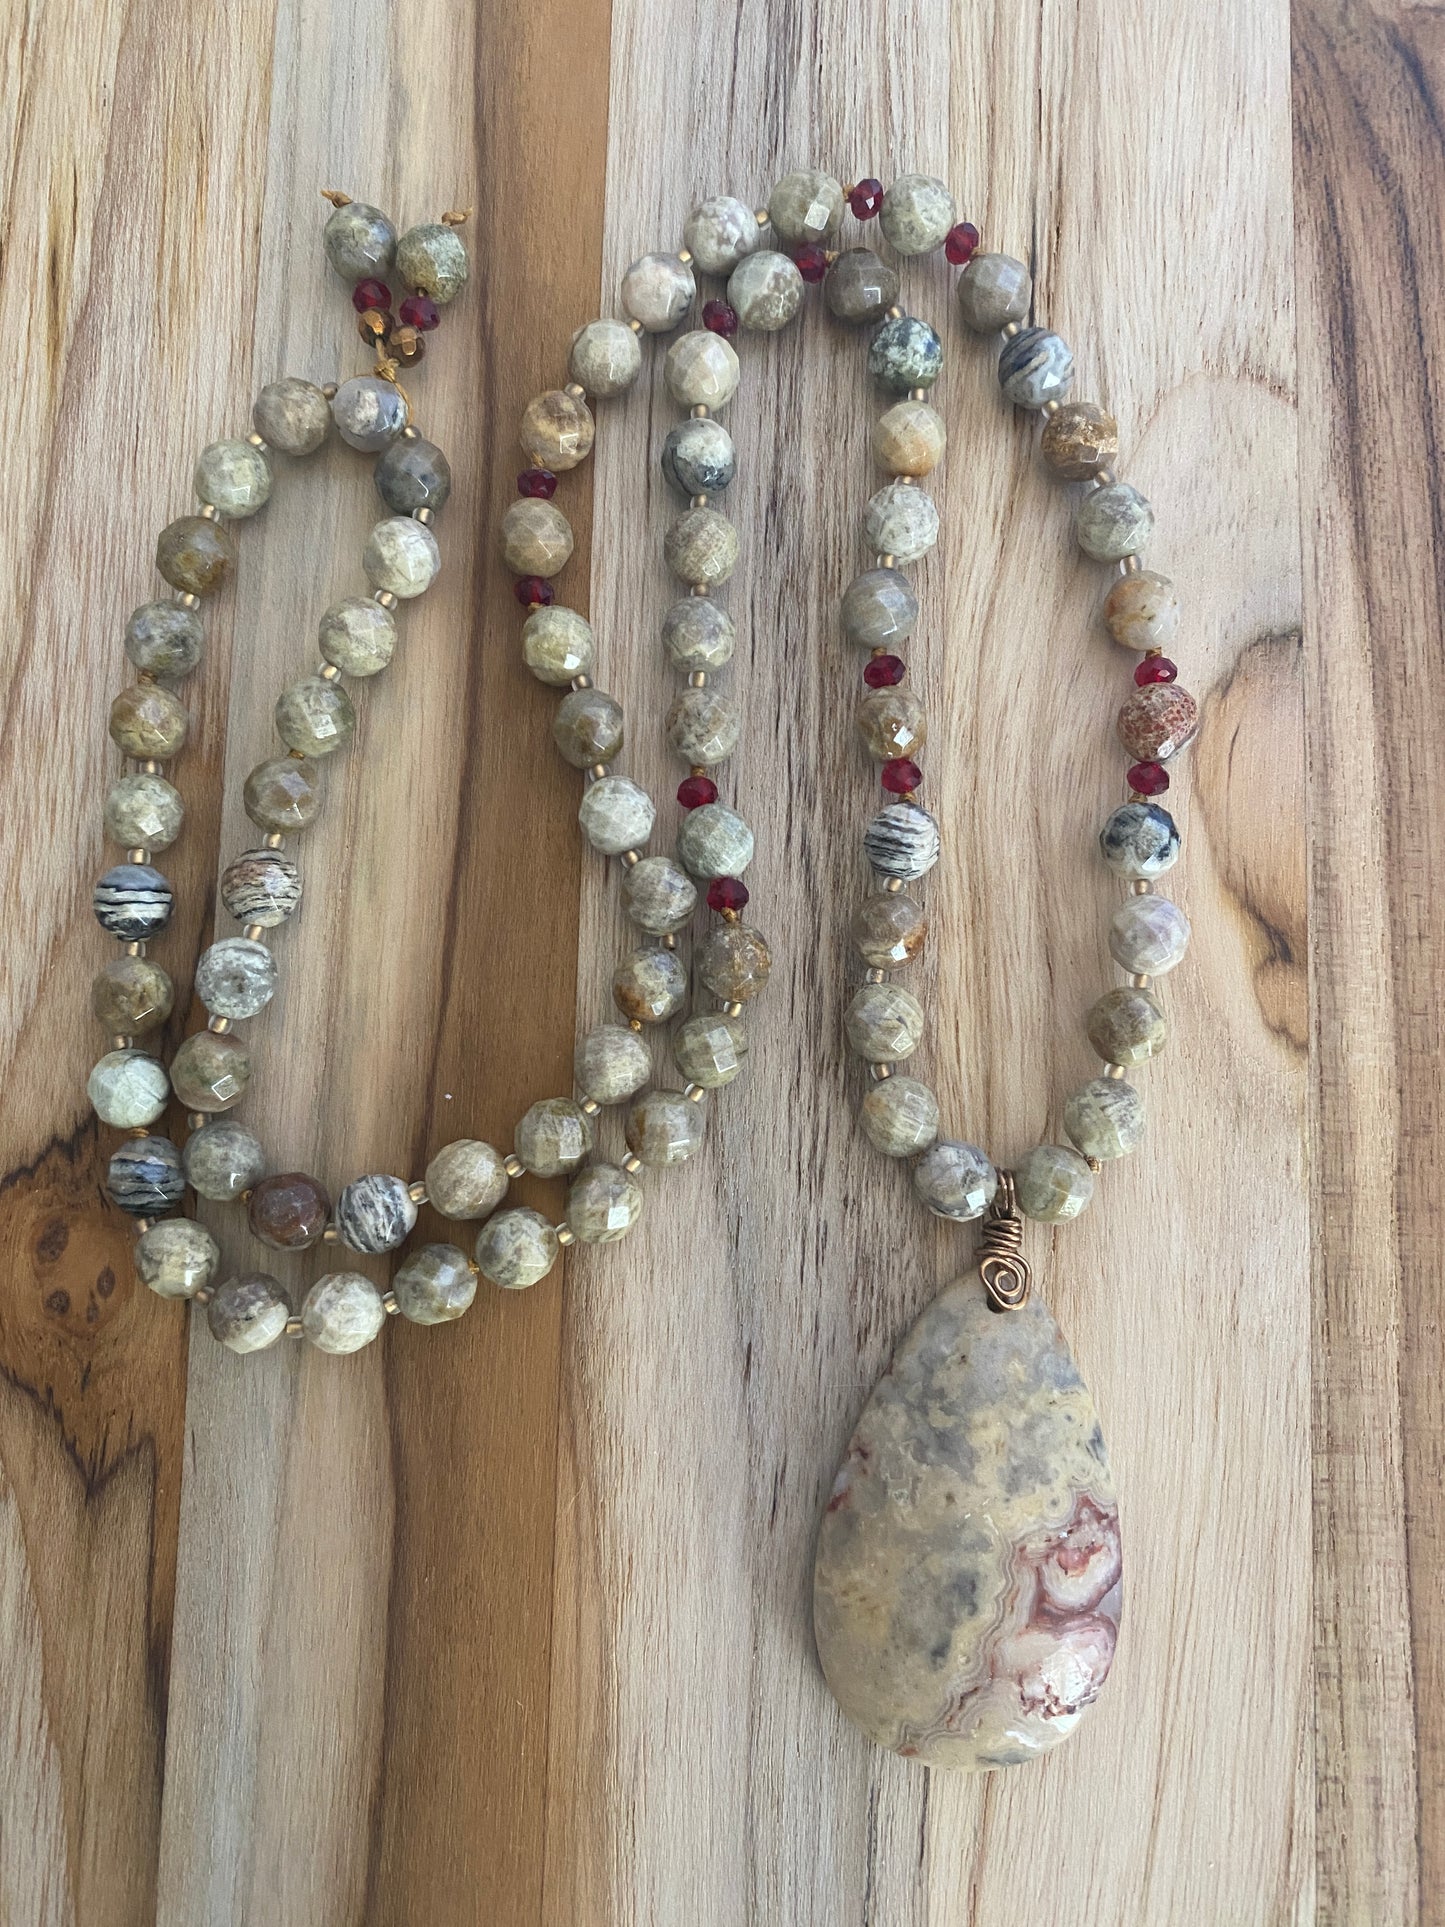 28" Long Beaded Crazy Lace Agate Pendant Necklace with Faceted Agate & Crystal Beads